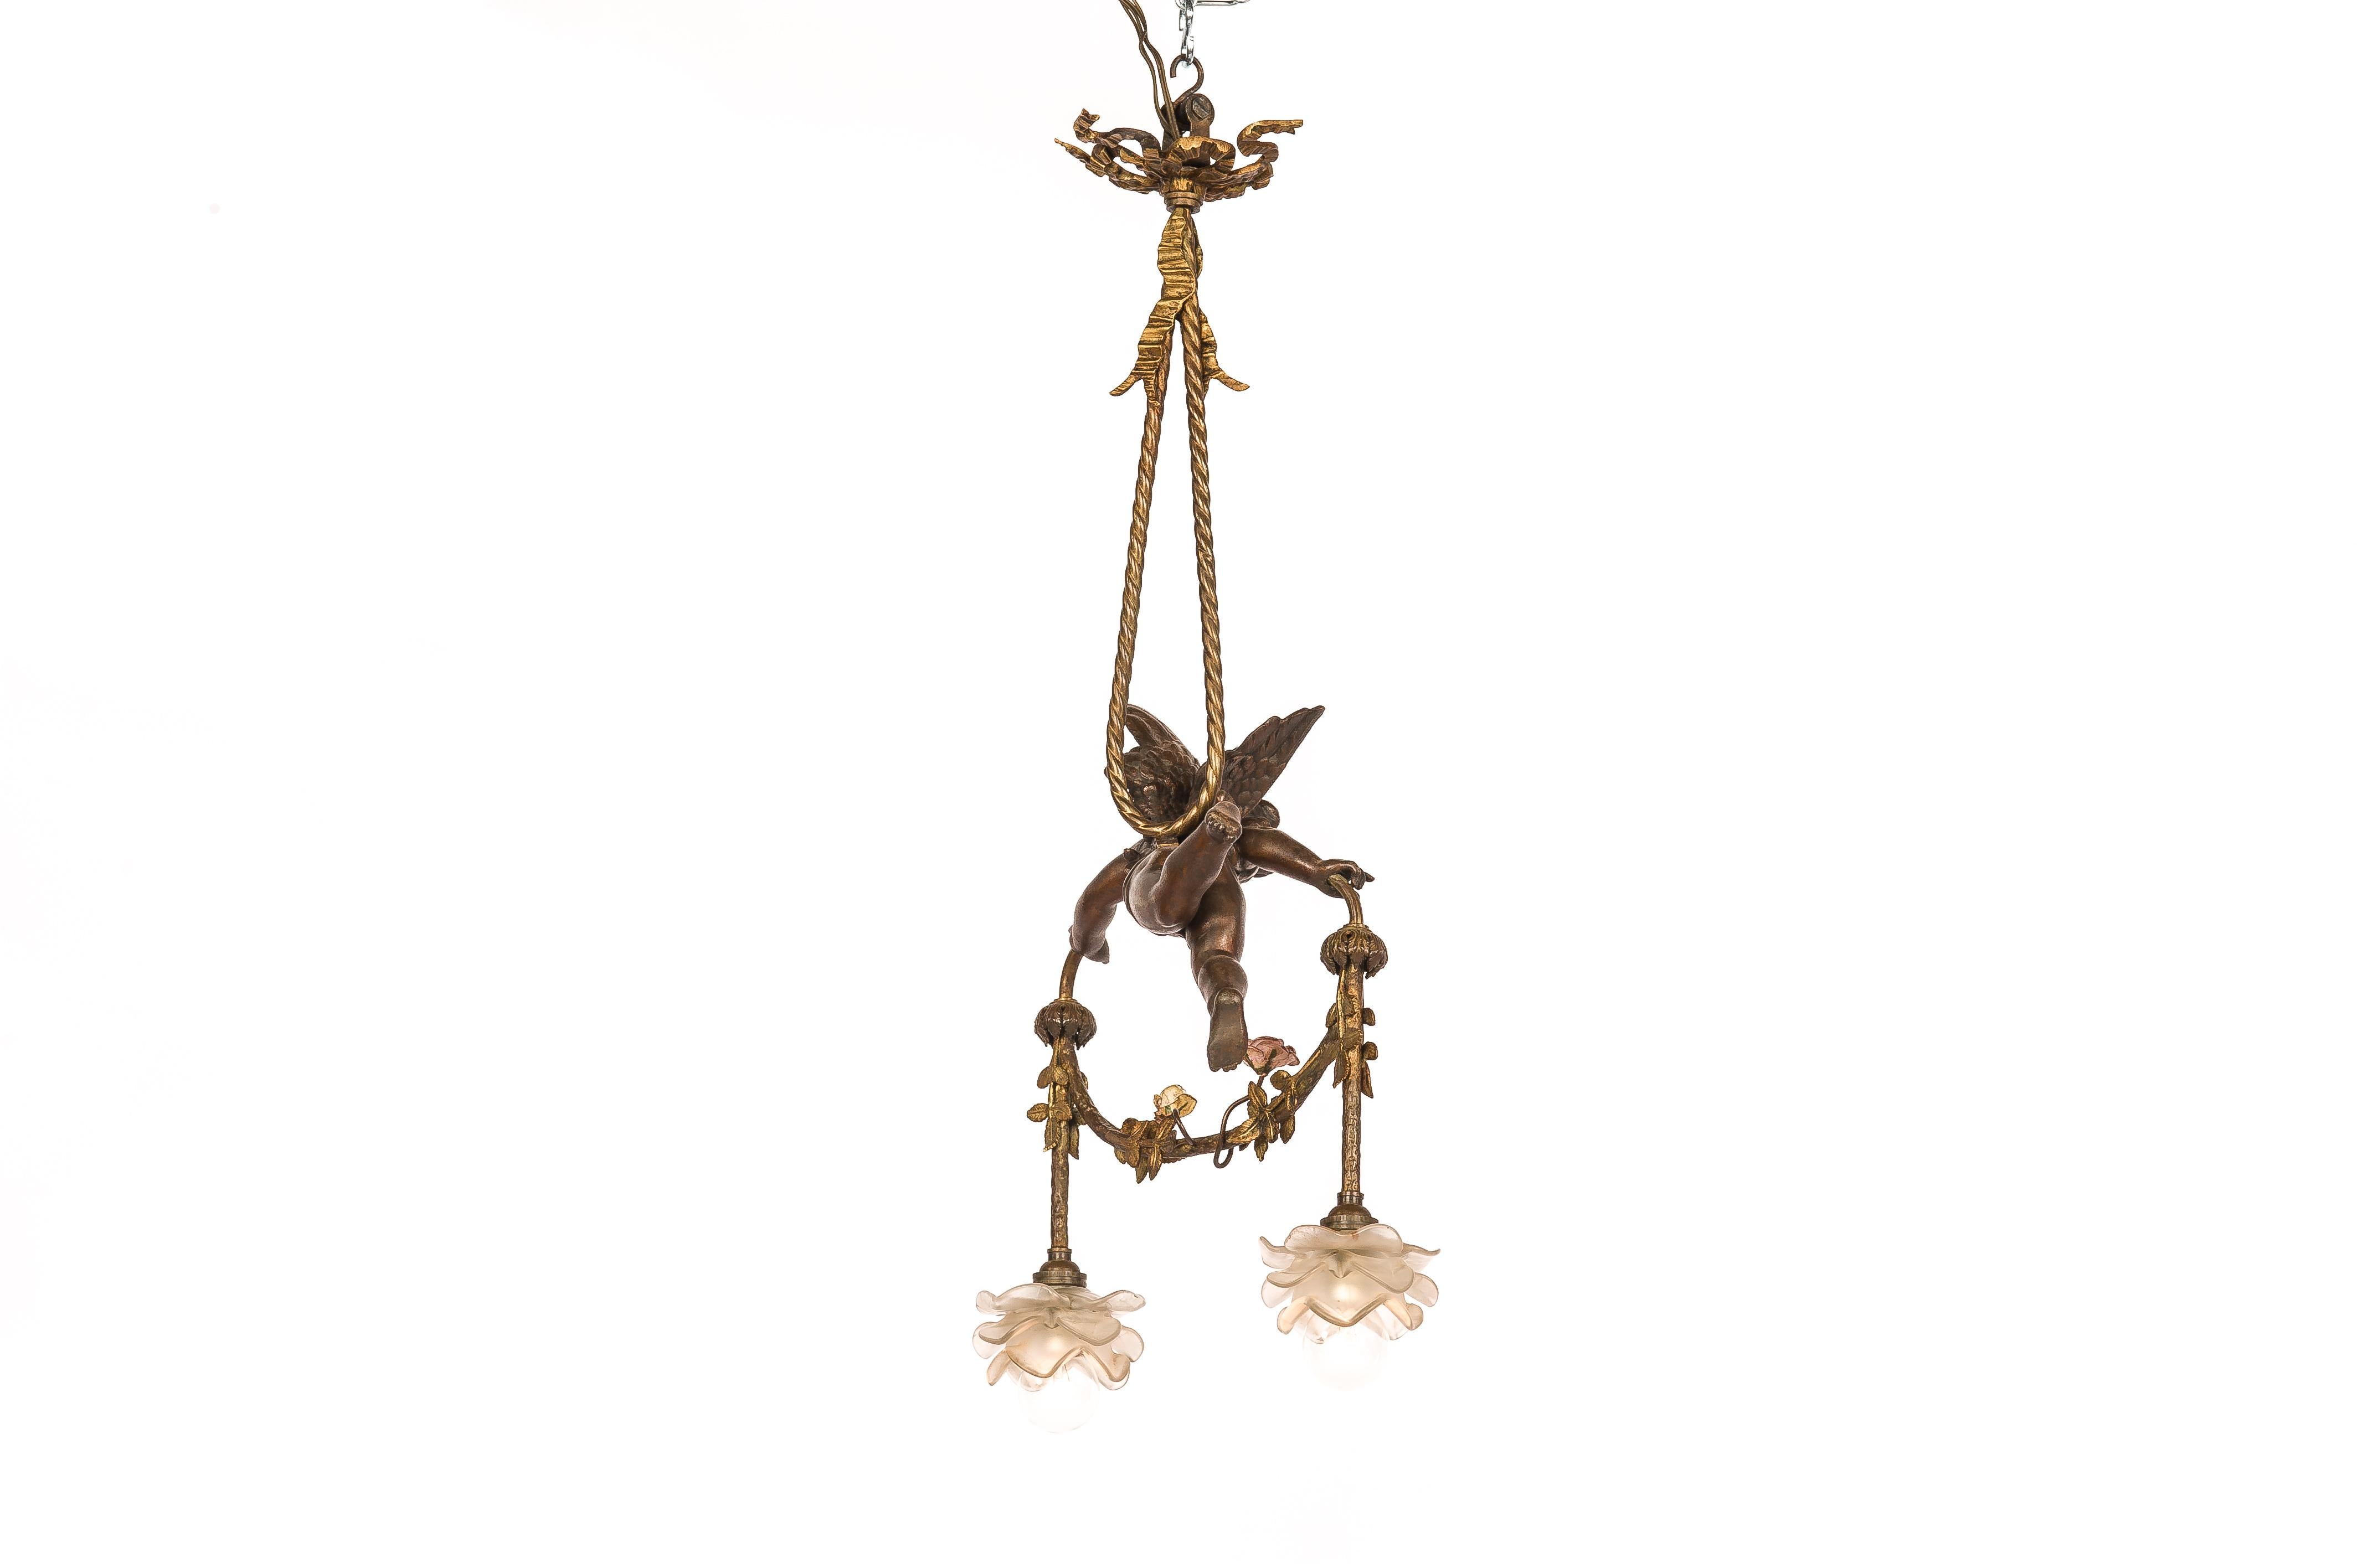 19th Century Antique 19th-Century French Brass Angel or Putti Pendant Light with Floral Garla